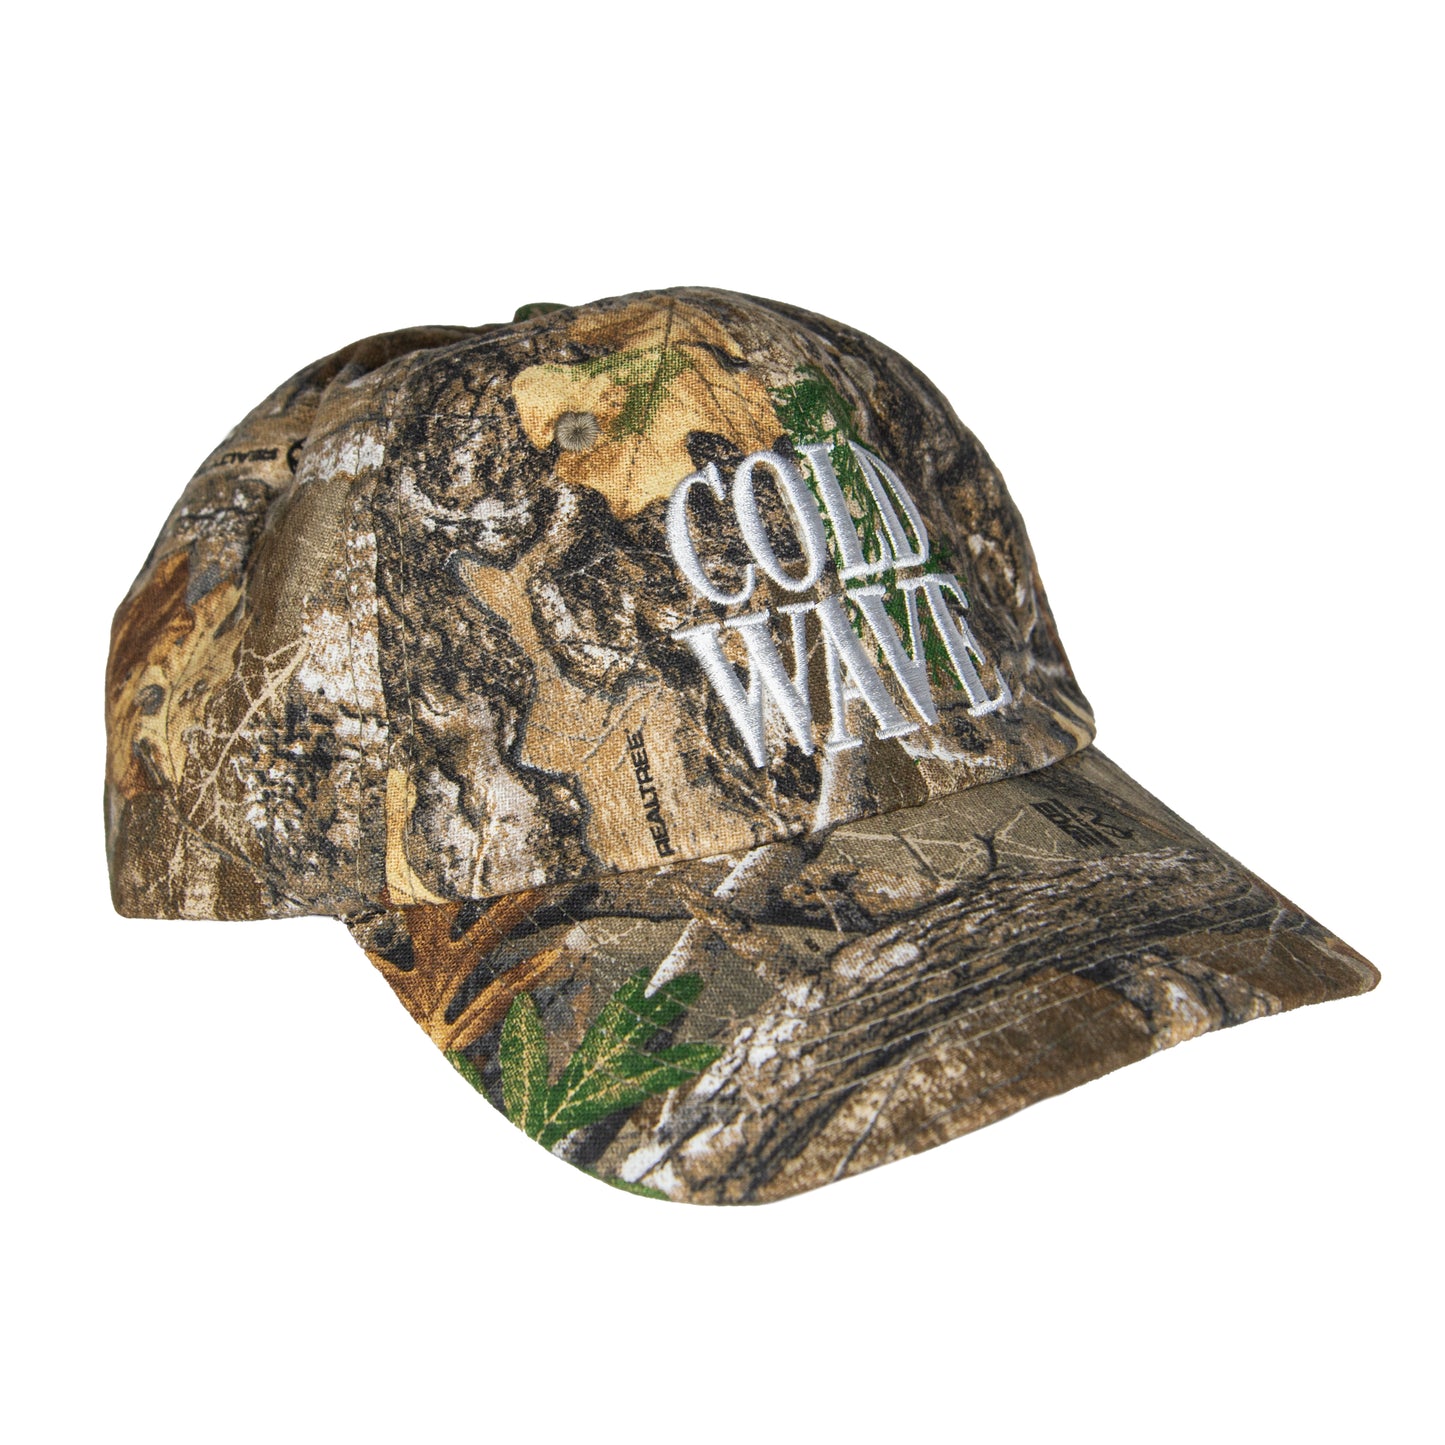 Cold Wave 'Stacked Logo' Real Tree Camo Cap